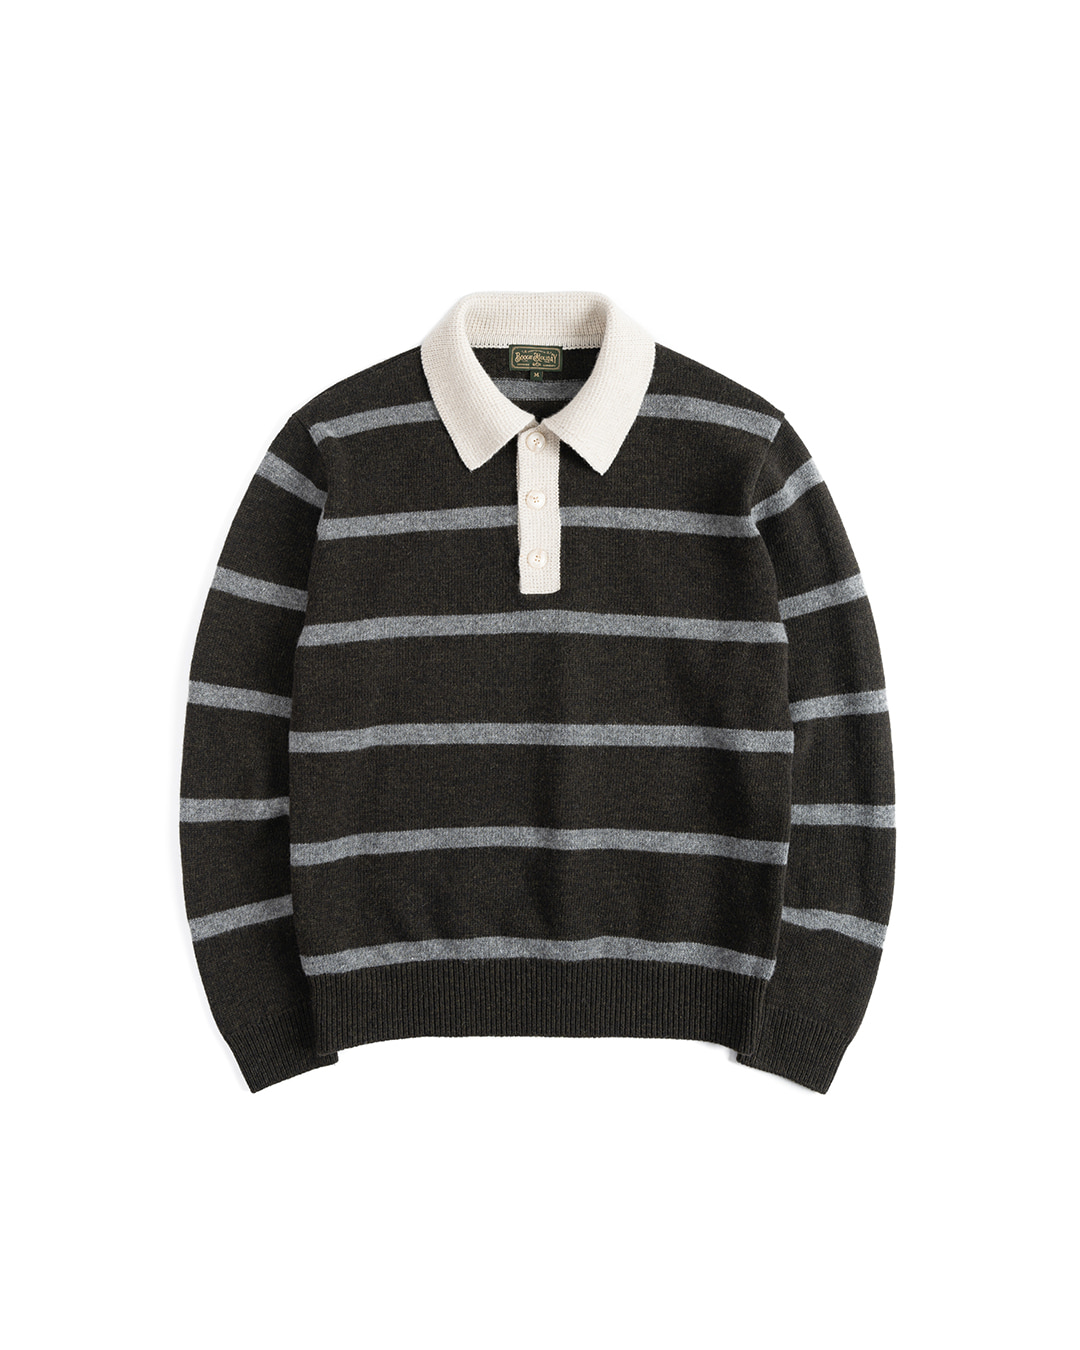 10 KNITTED RUGBY SHIRT (dark olive)